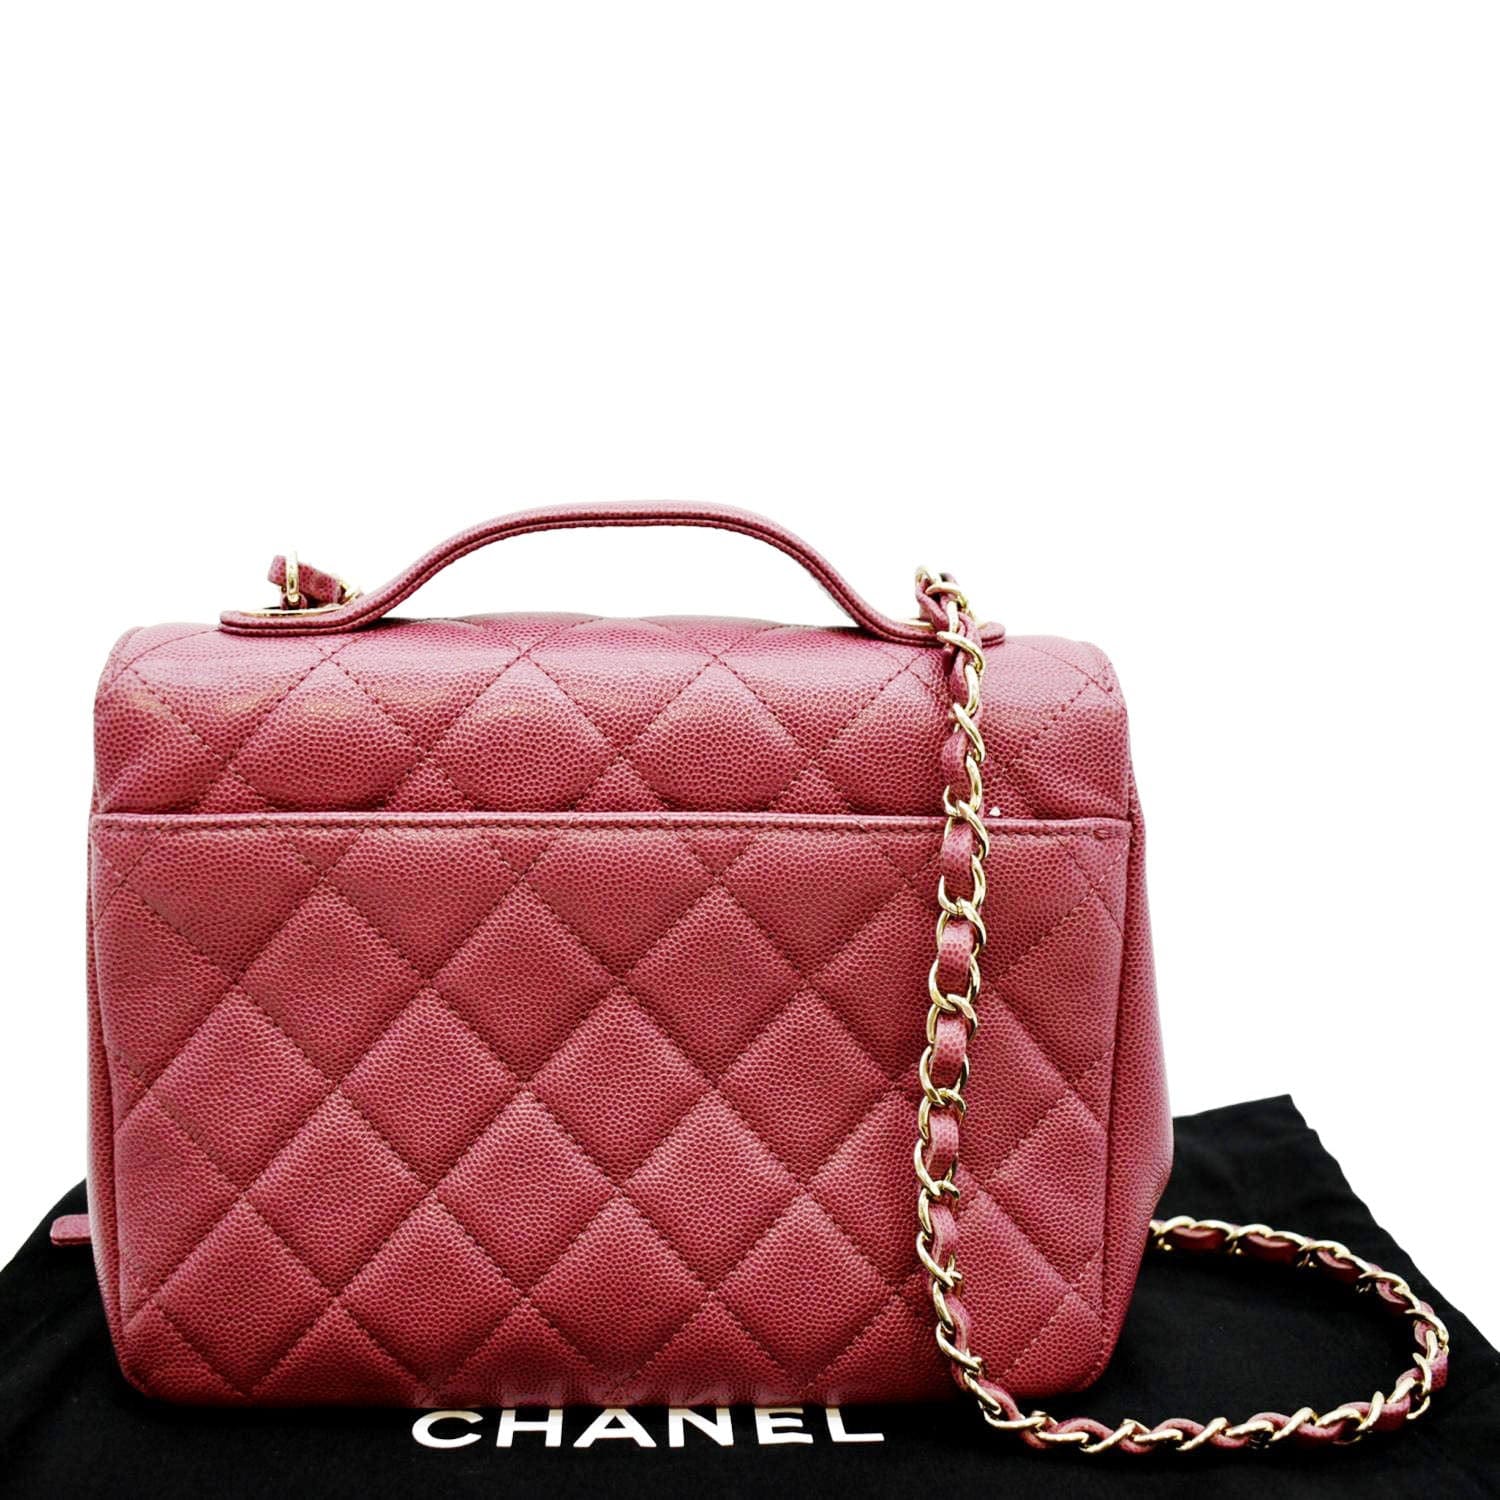 Chanel Red Caviar Leather Small Business Affinity Flap Shoulder Bag Chanel